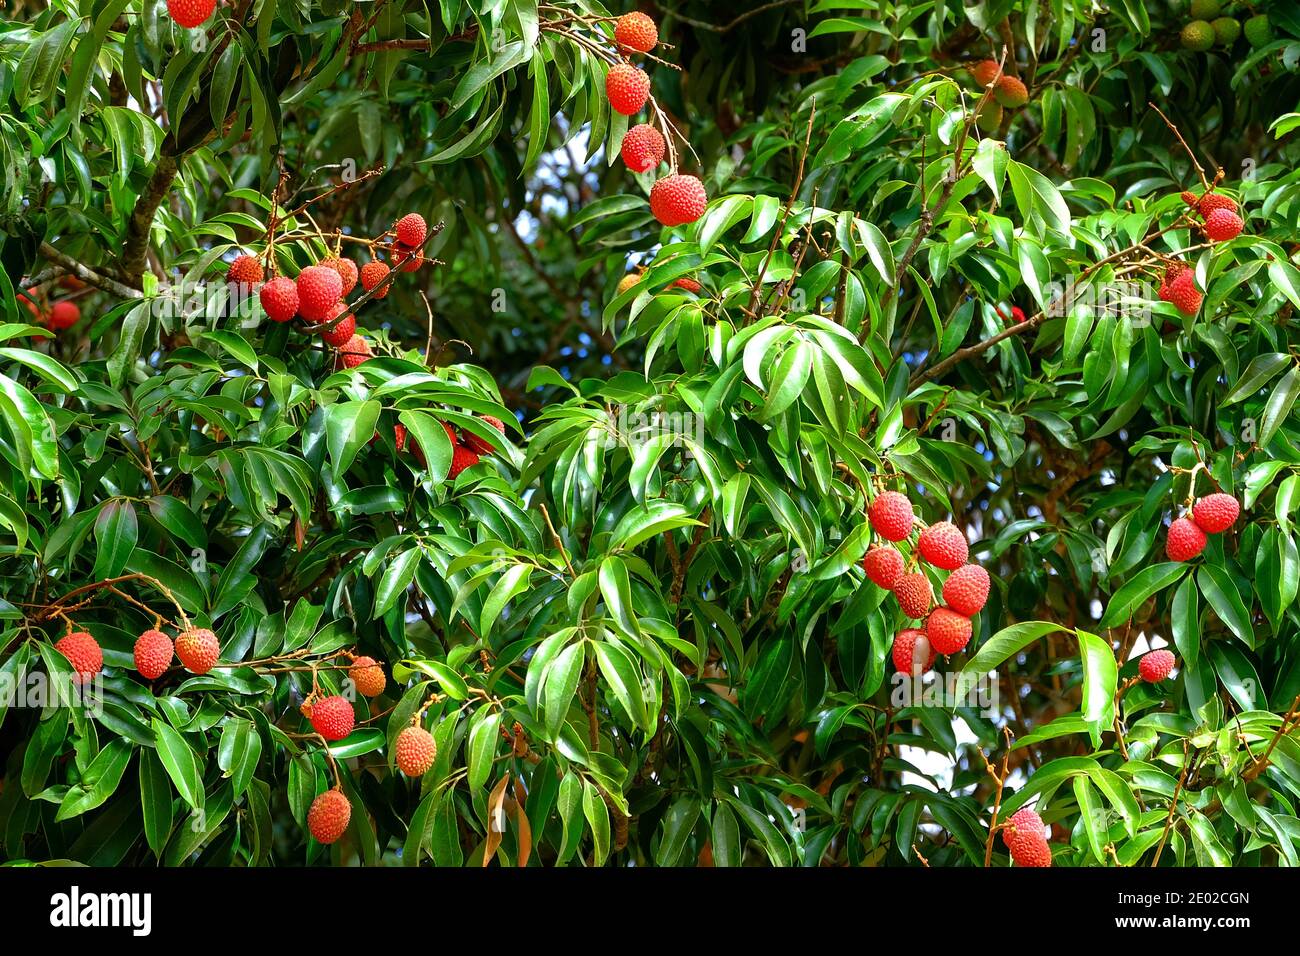 Lychee (lechee, leechee, litchee) tree with ripe red fruits ready to be picked. Stock Photo